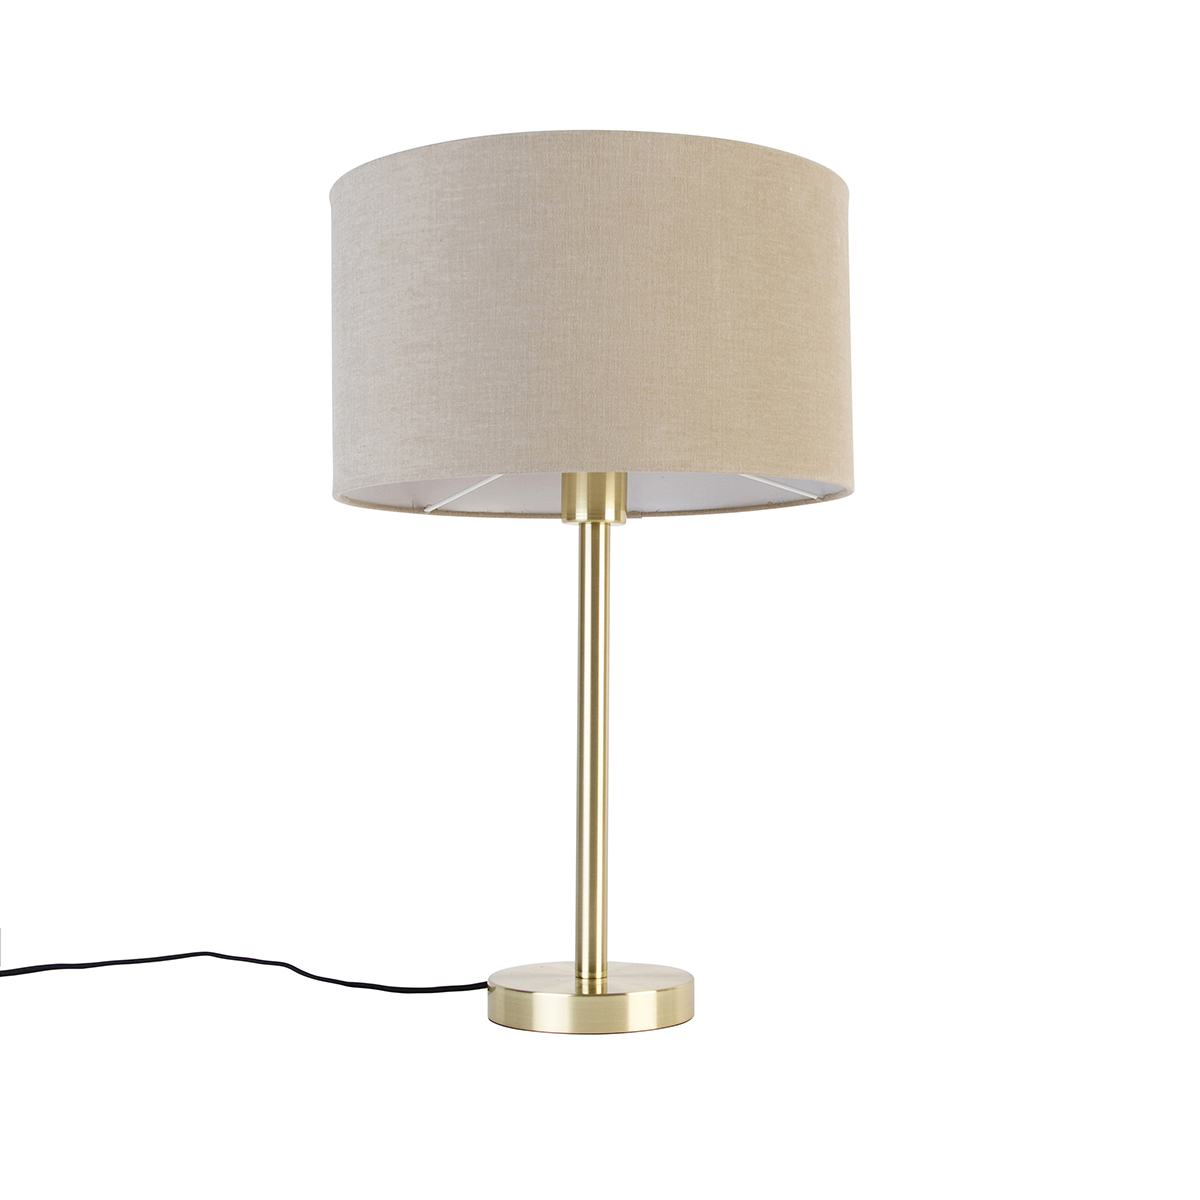 Classic table lamp brass with shade light brown 35 cm - Simplo